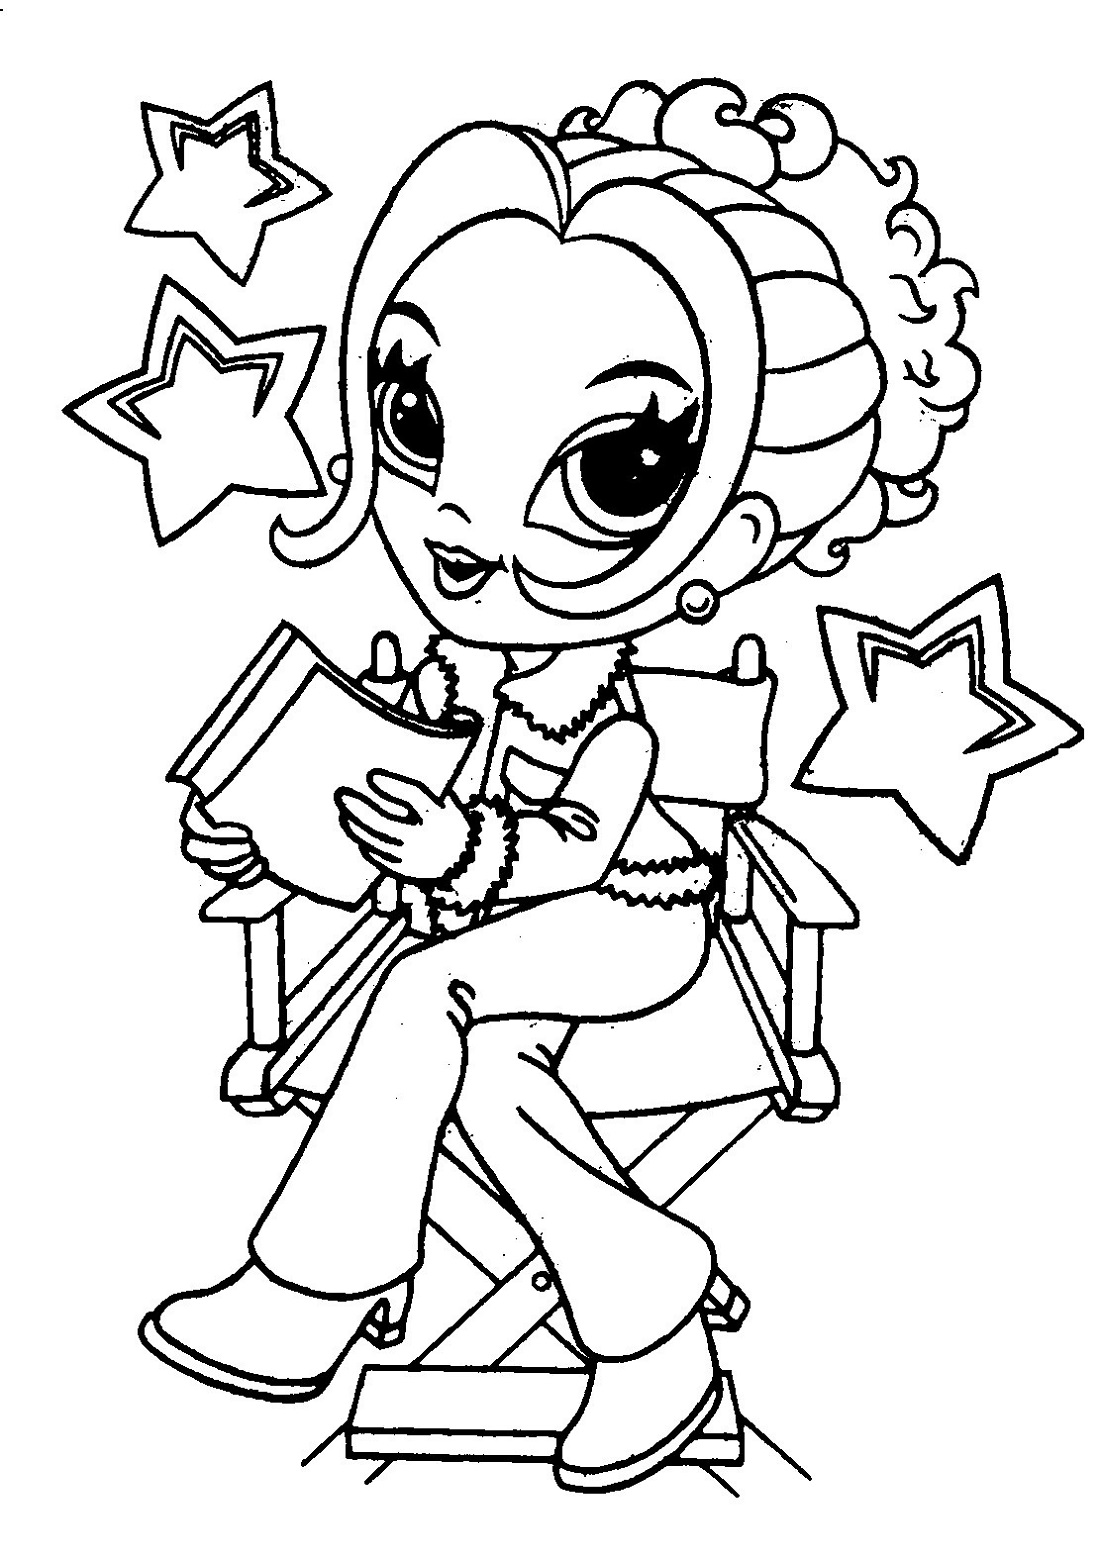 Coloring Sheets for Girl